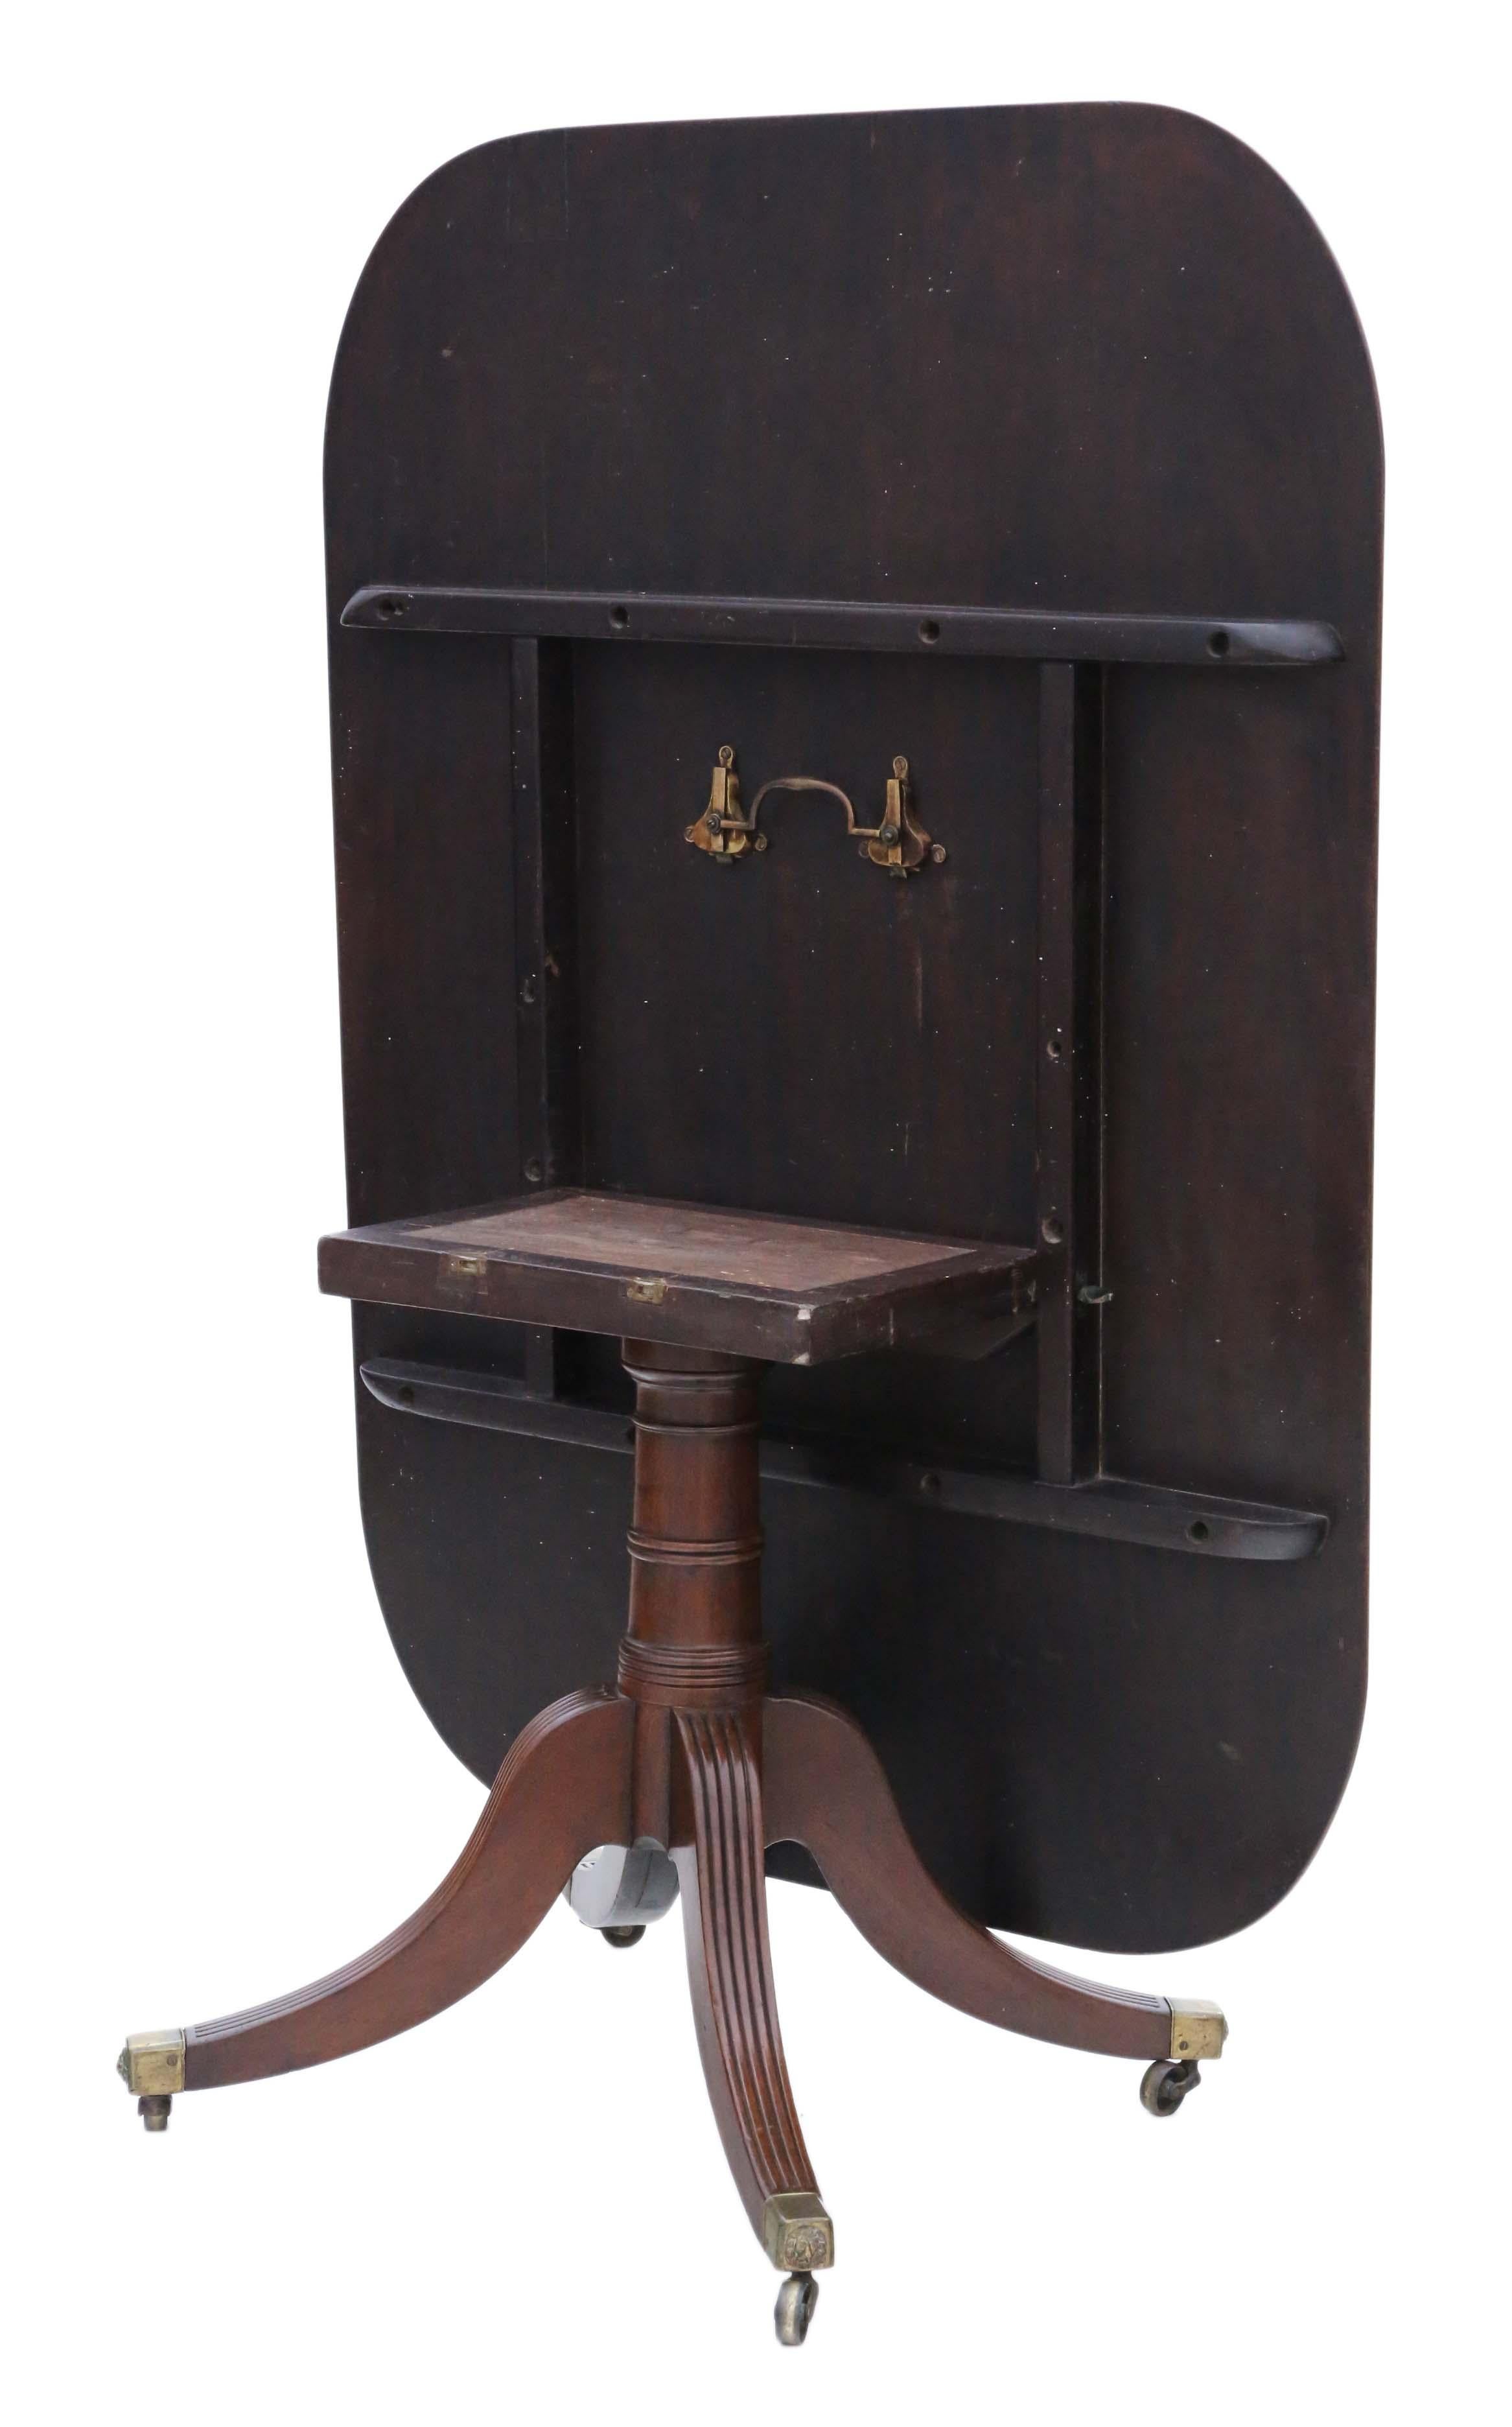 Antique fine quality Regency 1825 mahogany tilt top loo, centre or breakfast table.

Solid, heavy and with no loose joints. Beautiful gun barrel pedestal base.

No loose joints or woodworm.

Large period lion mask castors (some wear as one